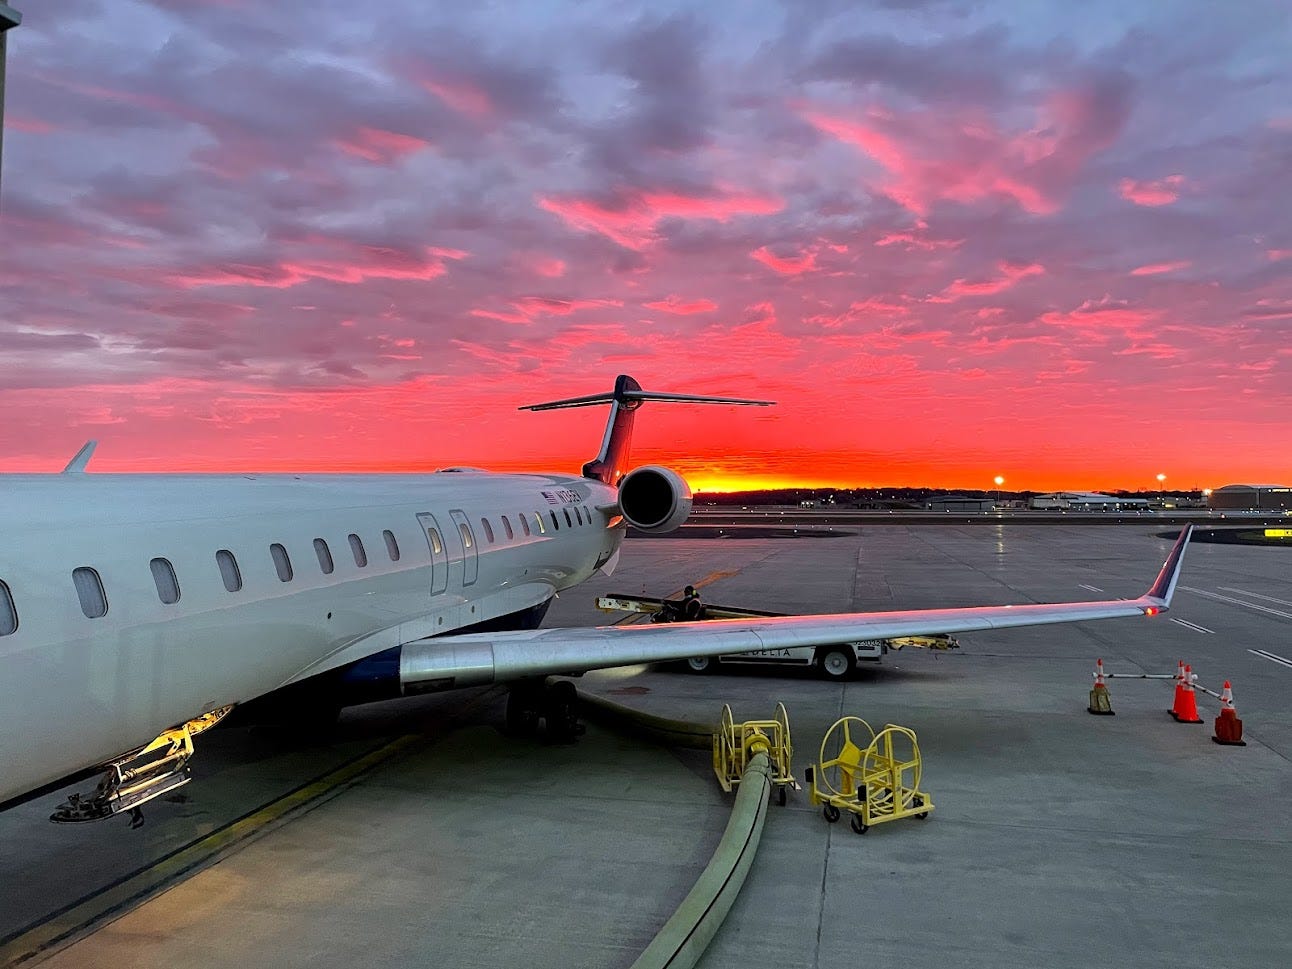 Sunrise at the Madison WI. airport.